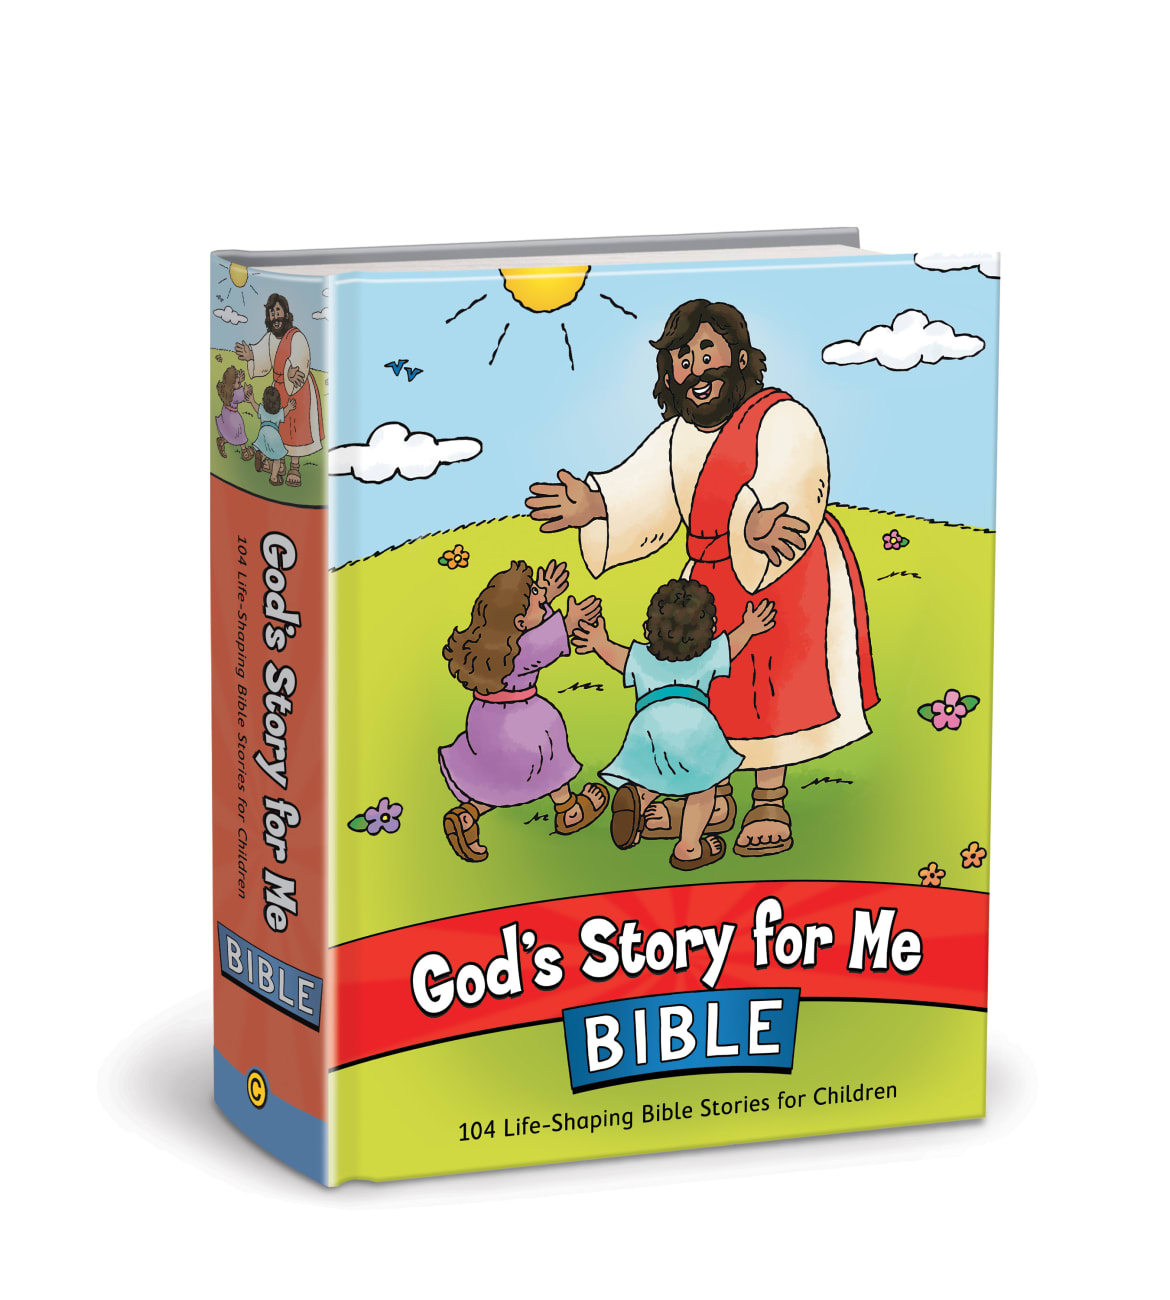 God's Story For Me Bible: 104 Life-Shaping Bible Stories For Children Hardback